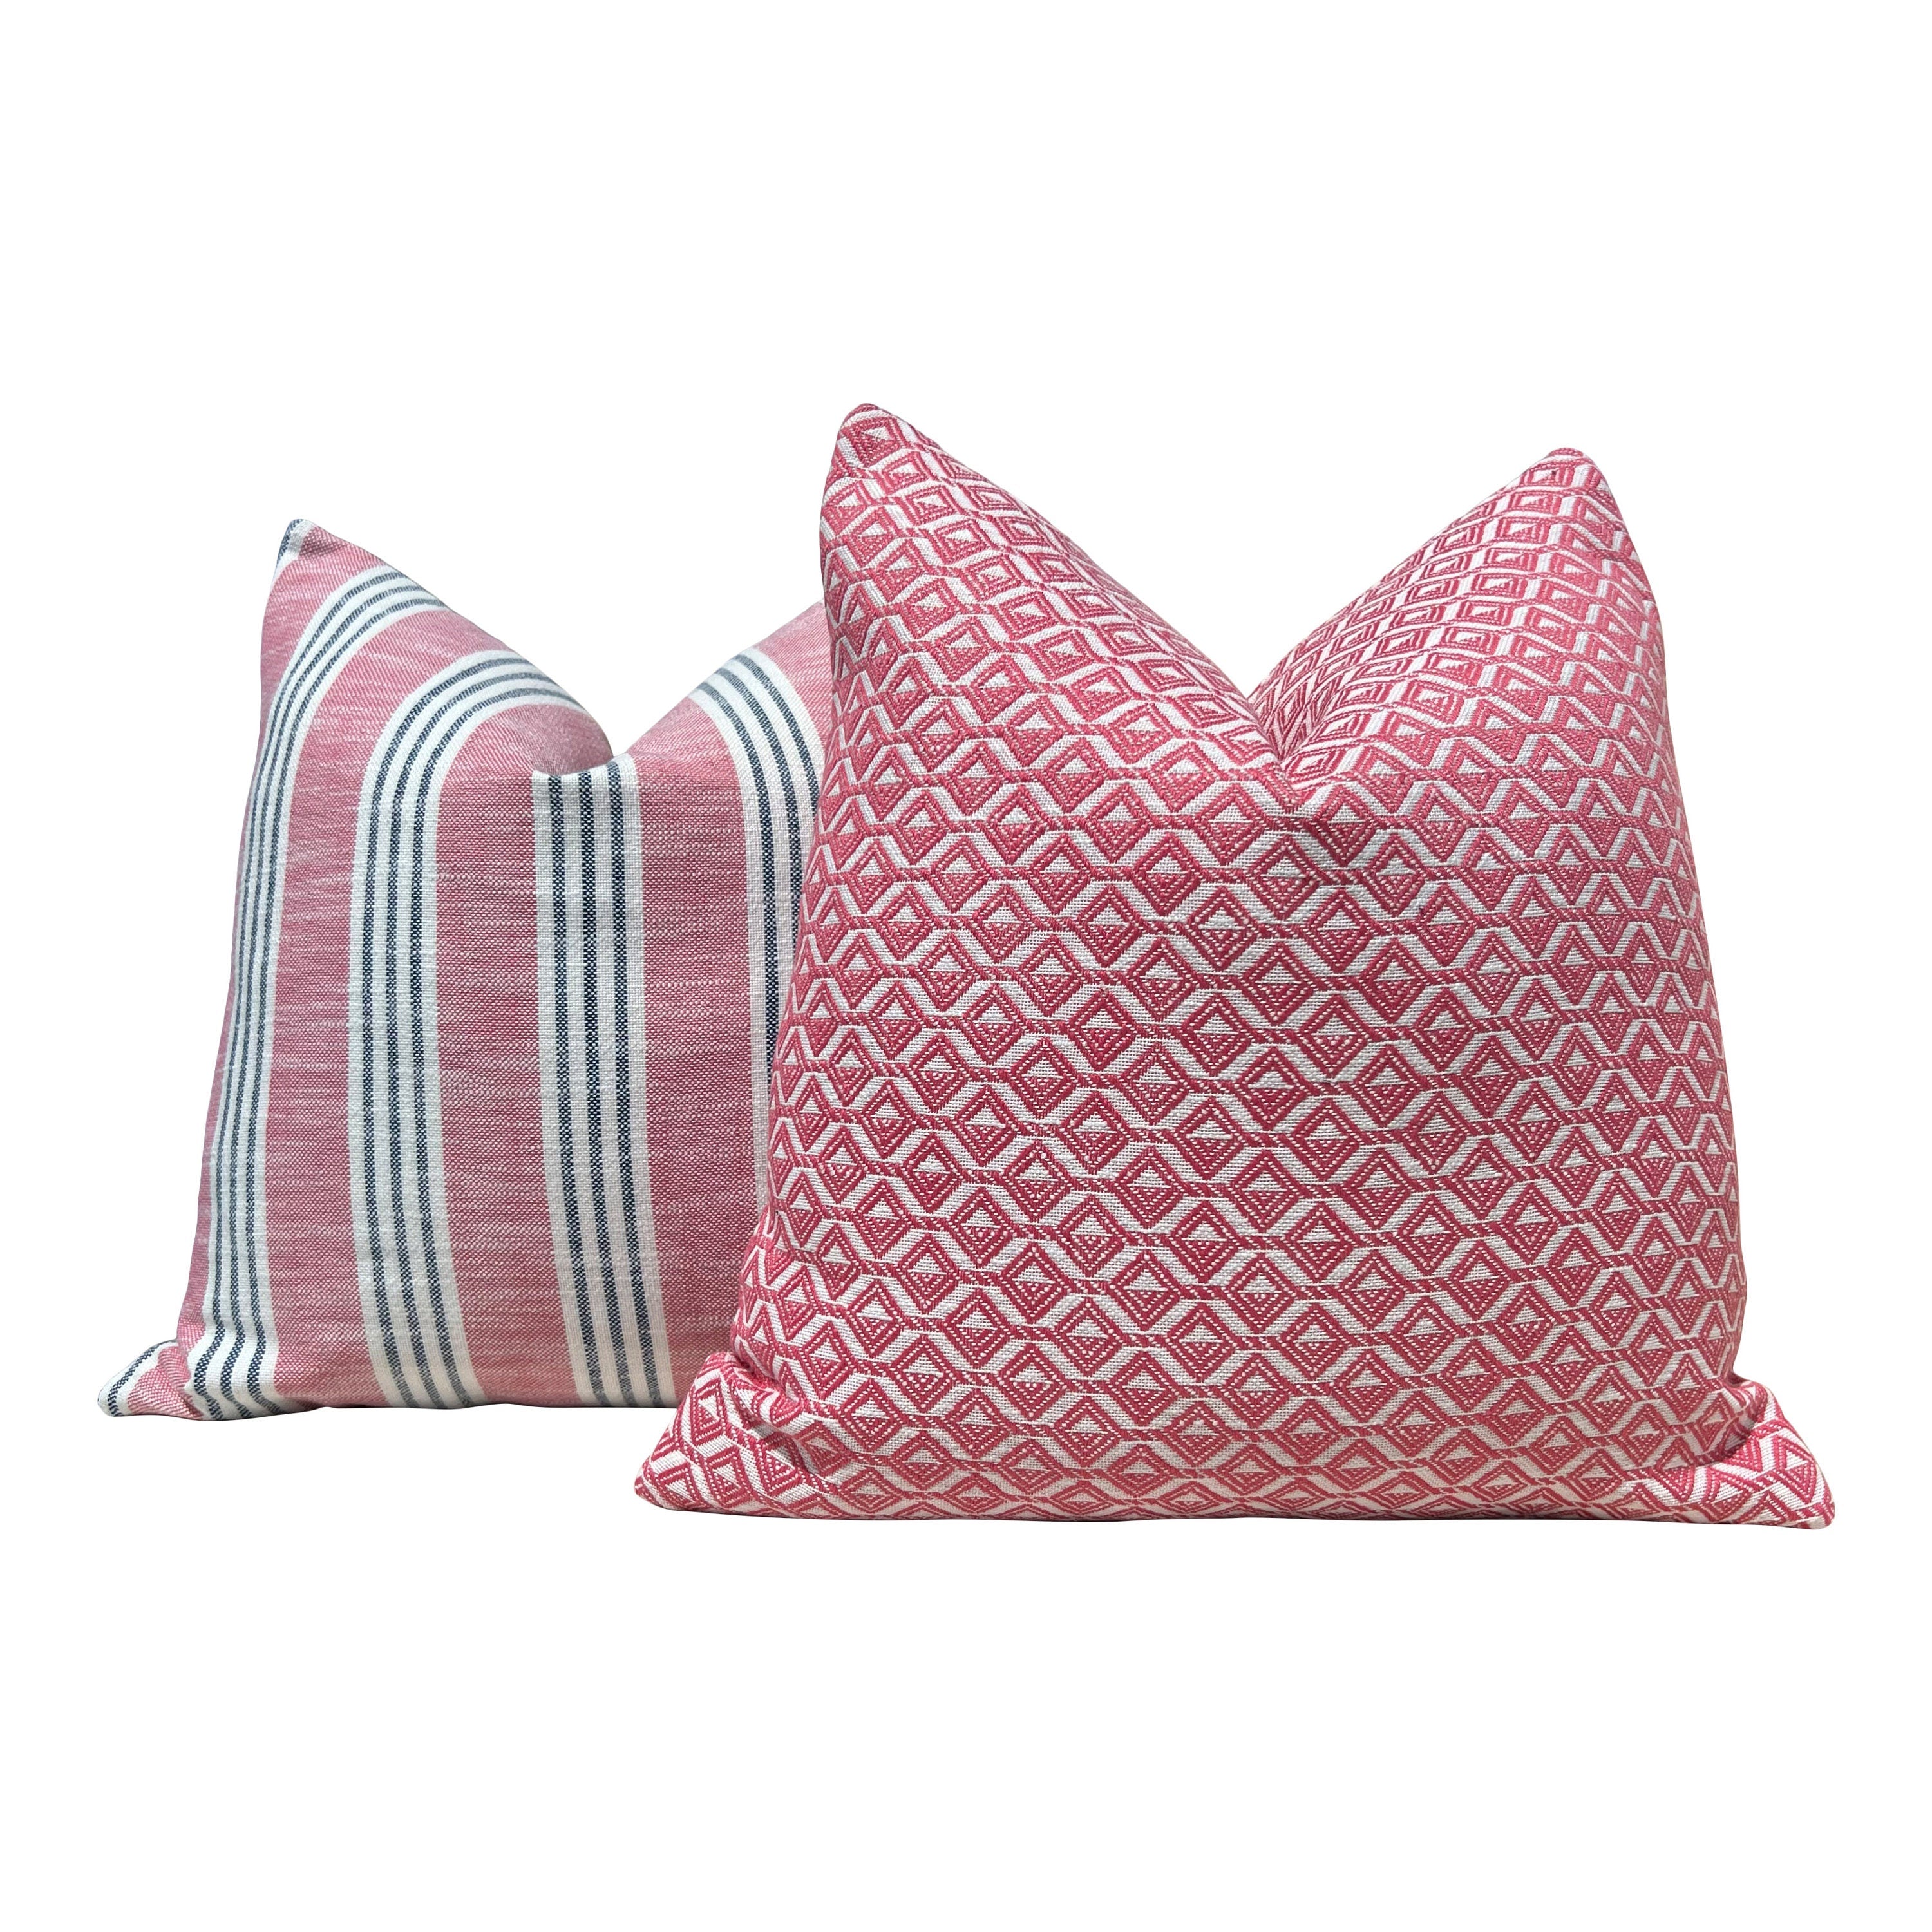 Outdoor Trion Woven Pillow in Peony. Thiabut Designer Patio Decorative Accent Cushion in Pink. Lumbar Chair Pillow Case in Pink and White